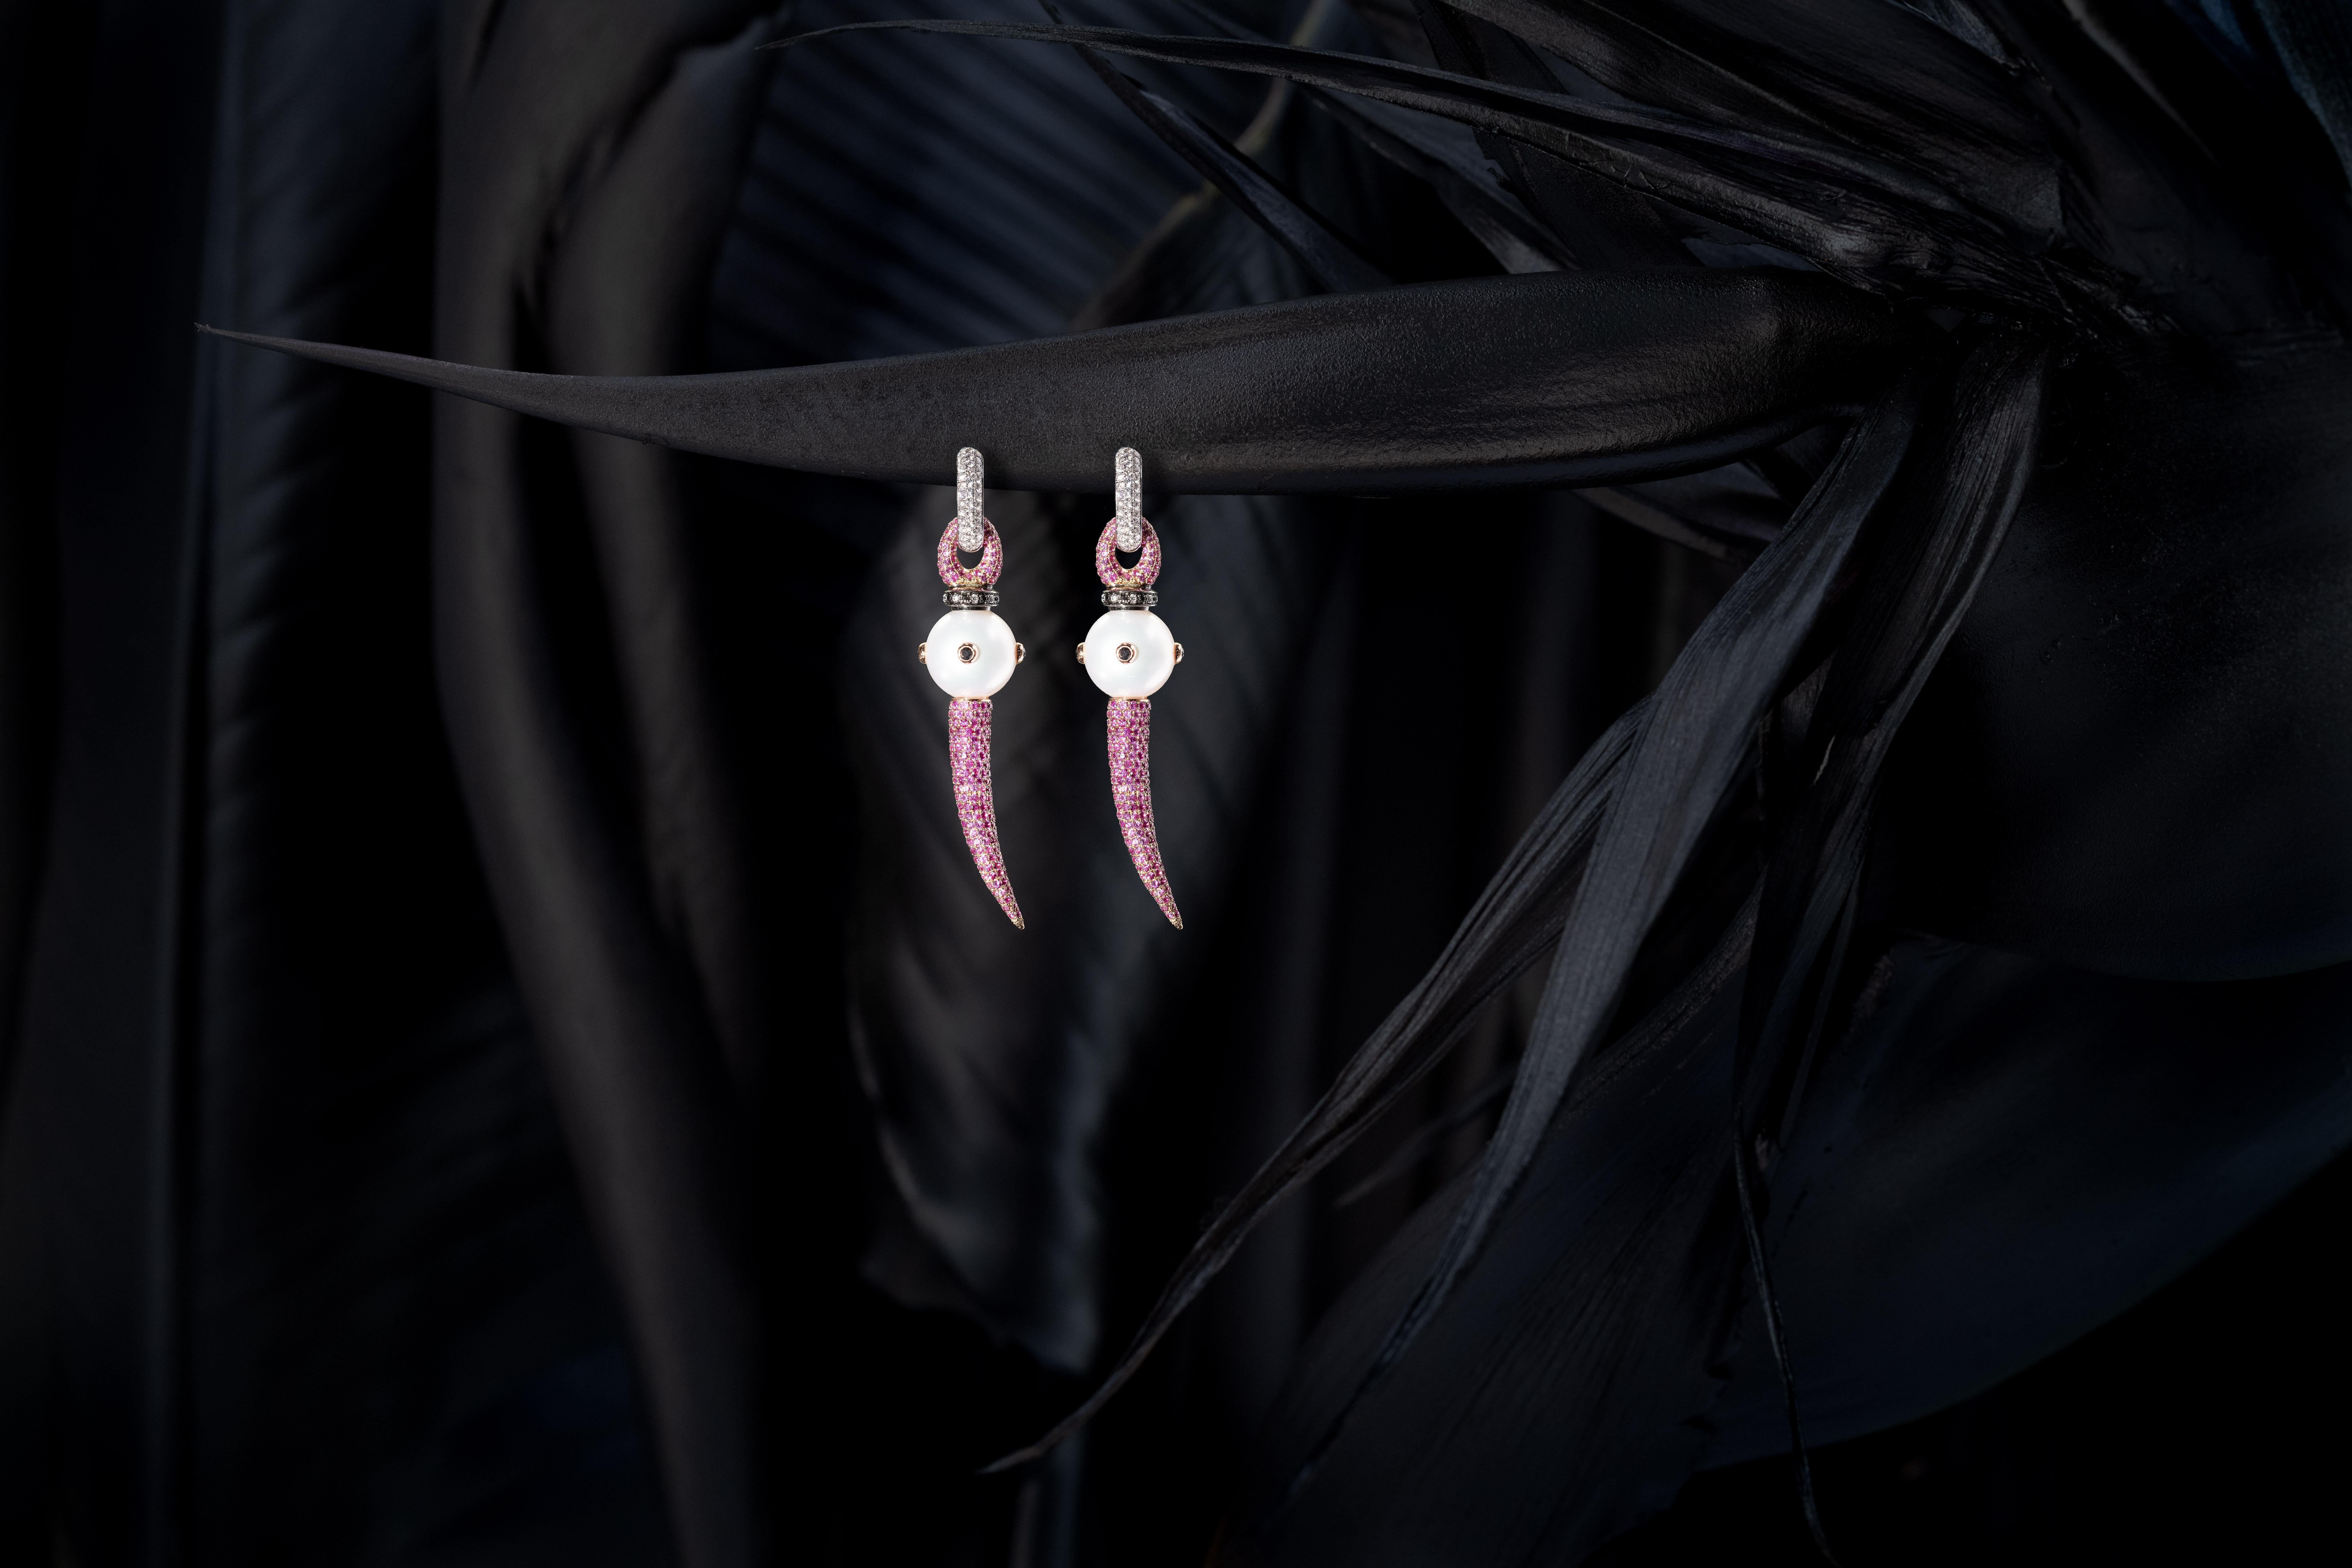 12.7 mm Australian South Sea Pearls (AAA quality) with encrusted black Diamonds in 18k yellow Gold, with pavé horns and sliders in 18k black Gold & 5.2 Carat pink Sapphires. 
Shown on 18k white Gold and 0.58 Carat white Diamond hoops. 
One pair in